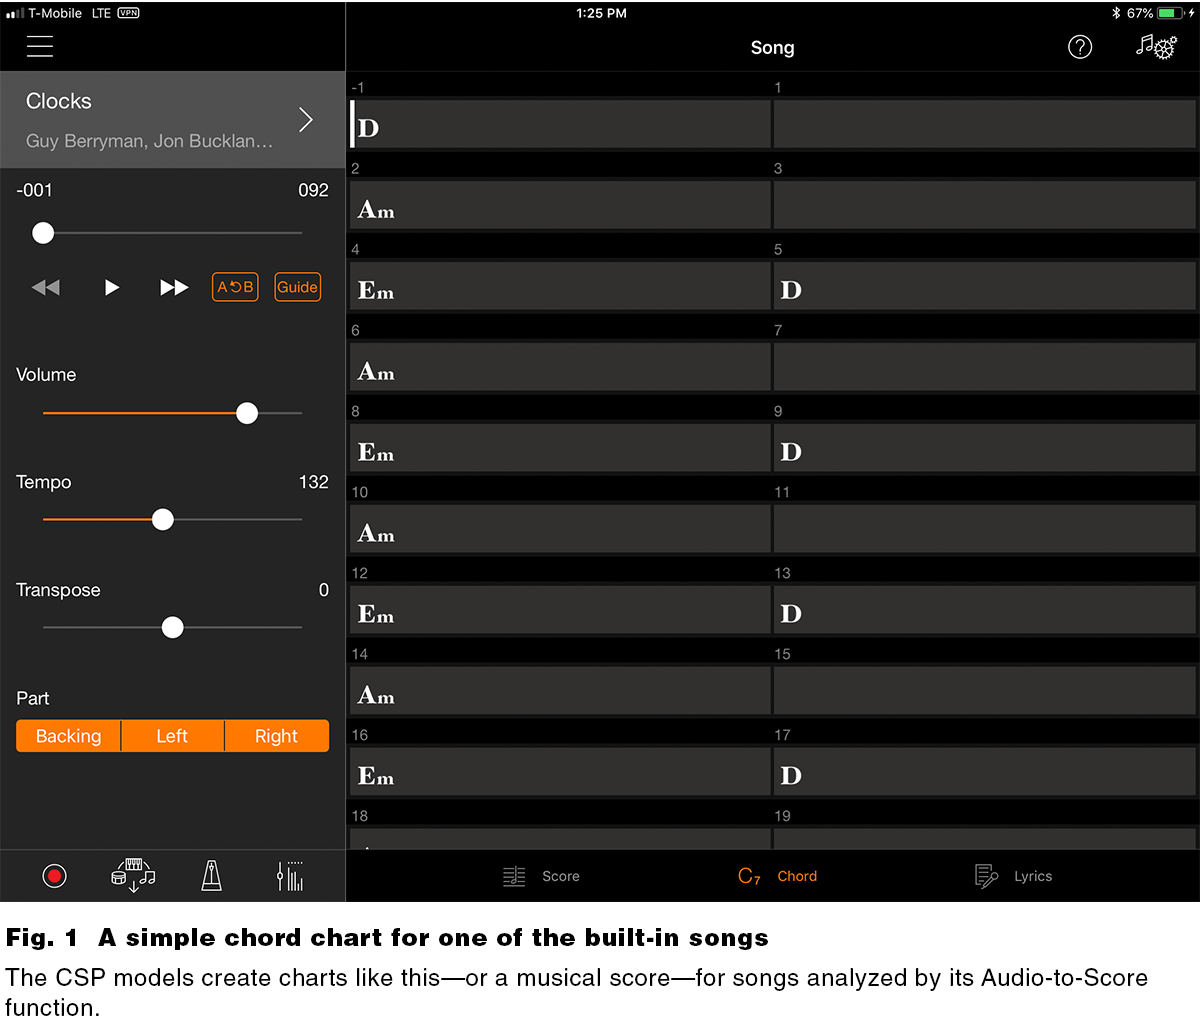 Fig. 1. A simple chord chart for one of the built-in songs. The CSP models create charts like this—or a musical score—for songs analyzed by its Audio-to-Score function.